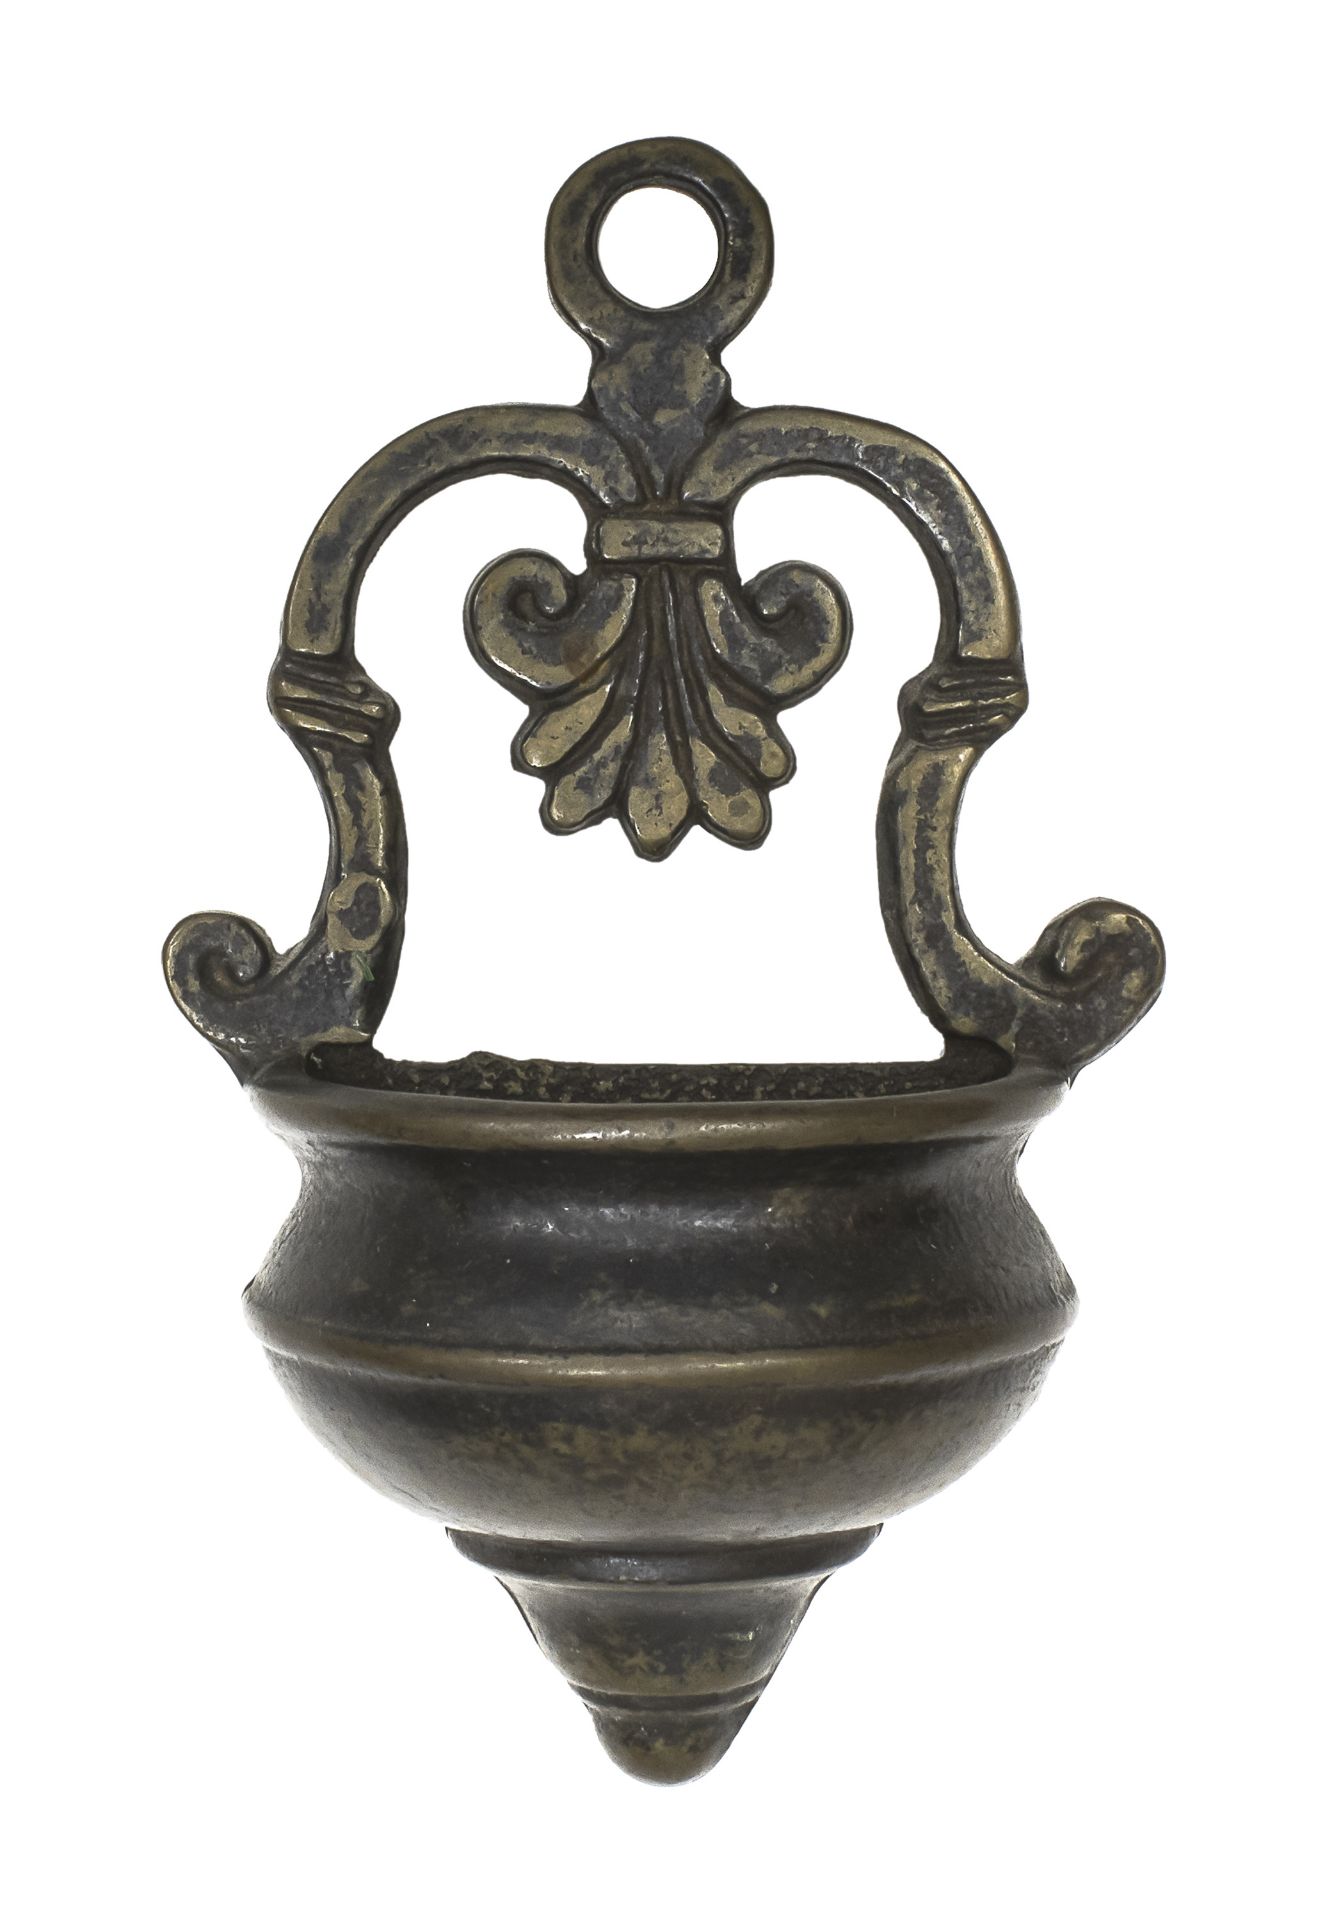 SMALL BRONZE STOUP 18TH CENTURY